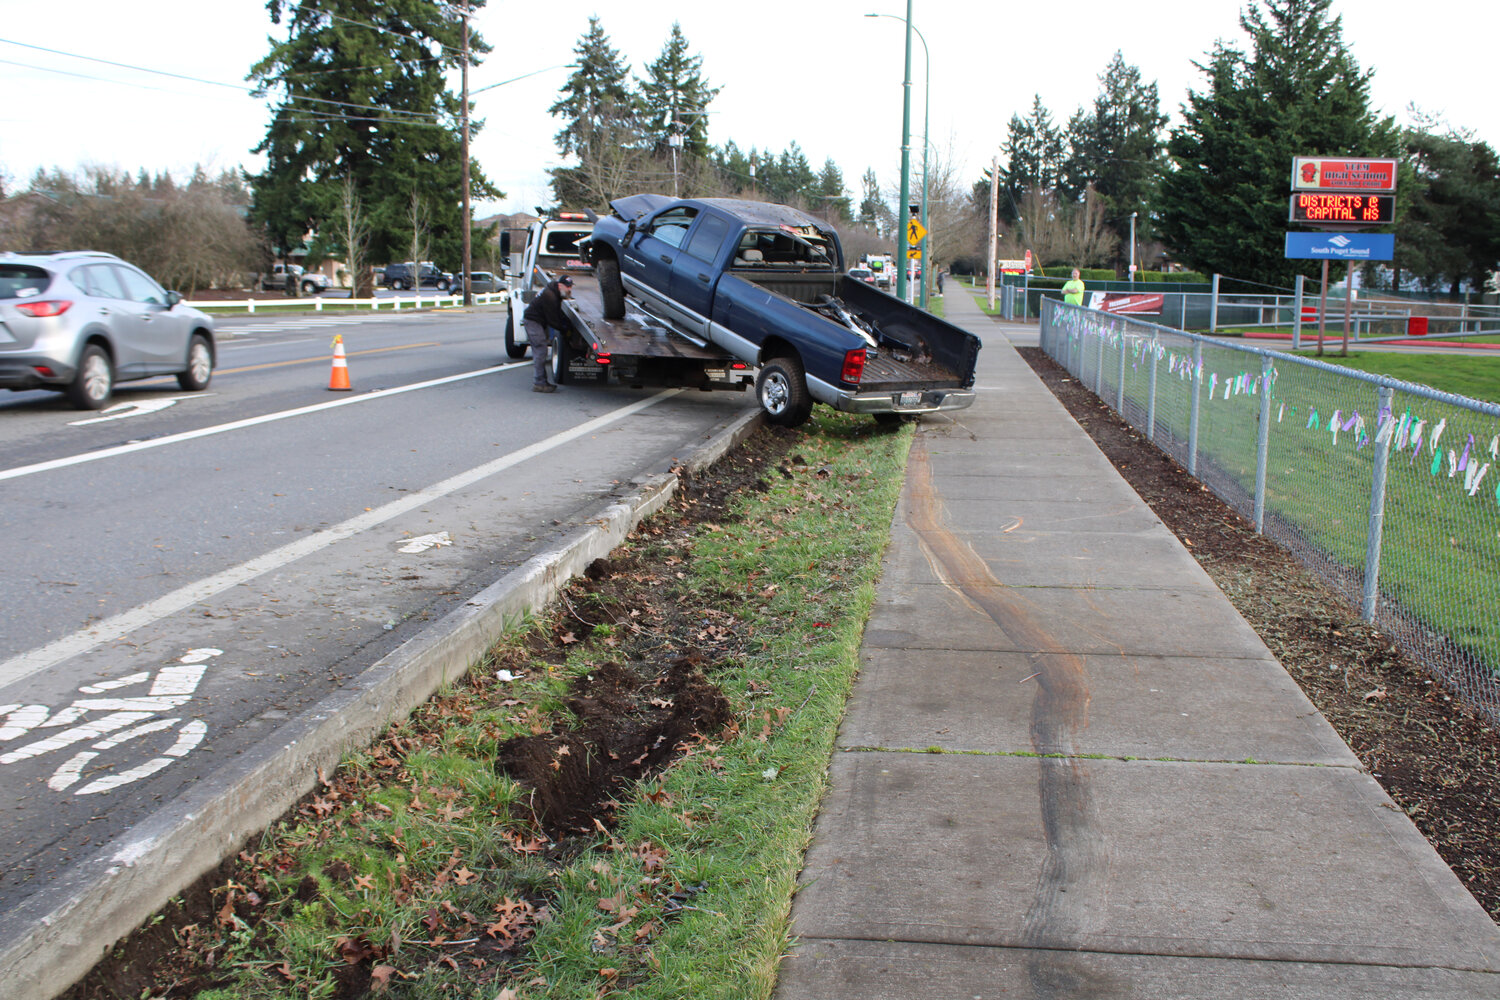 A Dodge Ram truck leaves a trail on the sidewalk after crashing in front of Yelm High School on Jan. 30.